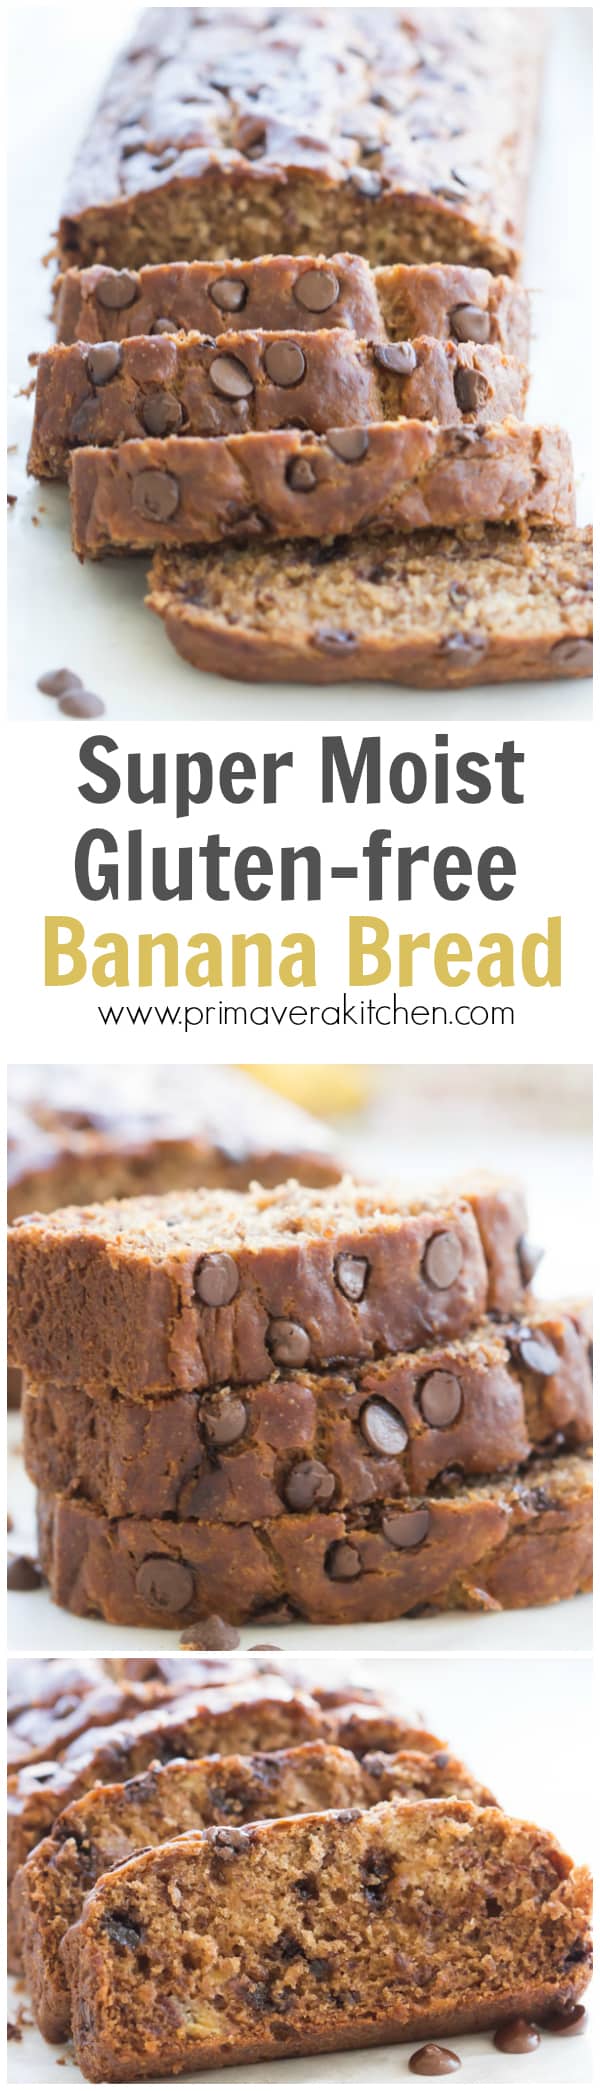 Super Moist Gluten-free Chocolate Chip Banana Bread - This Super Moist Gluten-free Banana Bread is load with overripe bananas, Greek yogurt and coconut oil. It's moist, fluffy, light and super flavourful. 